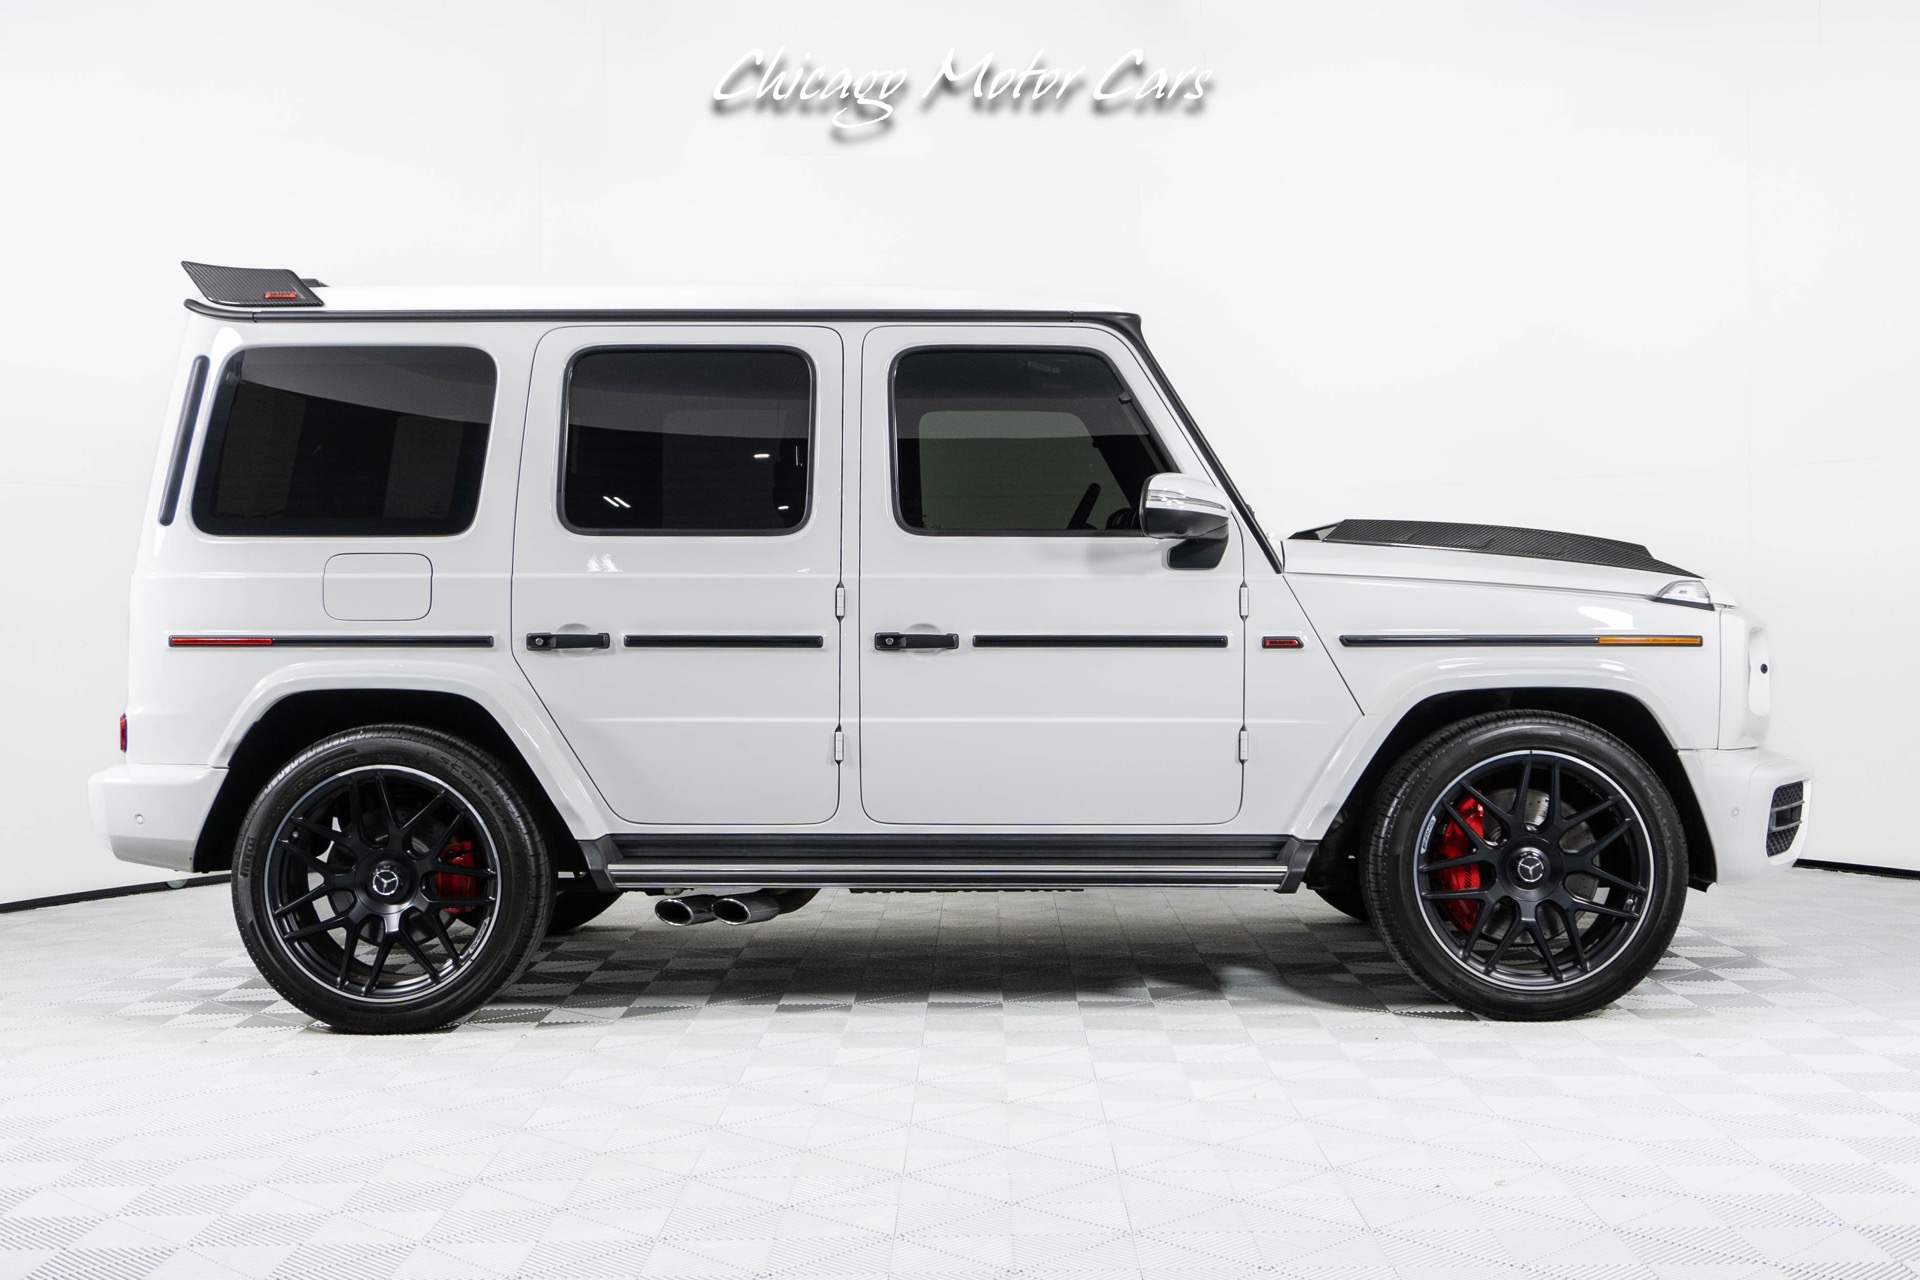 Used-2020-Mercedes-Benz-G63-AMG-900hp-Build-Exclusive-Interior-AMG-Carbon-Fiber-Trim-22in-Forged-Wheels